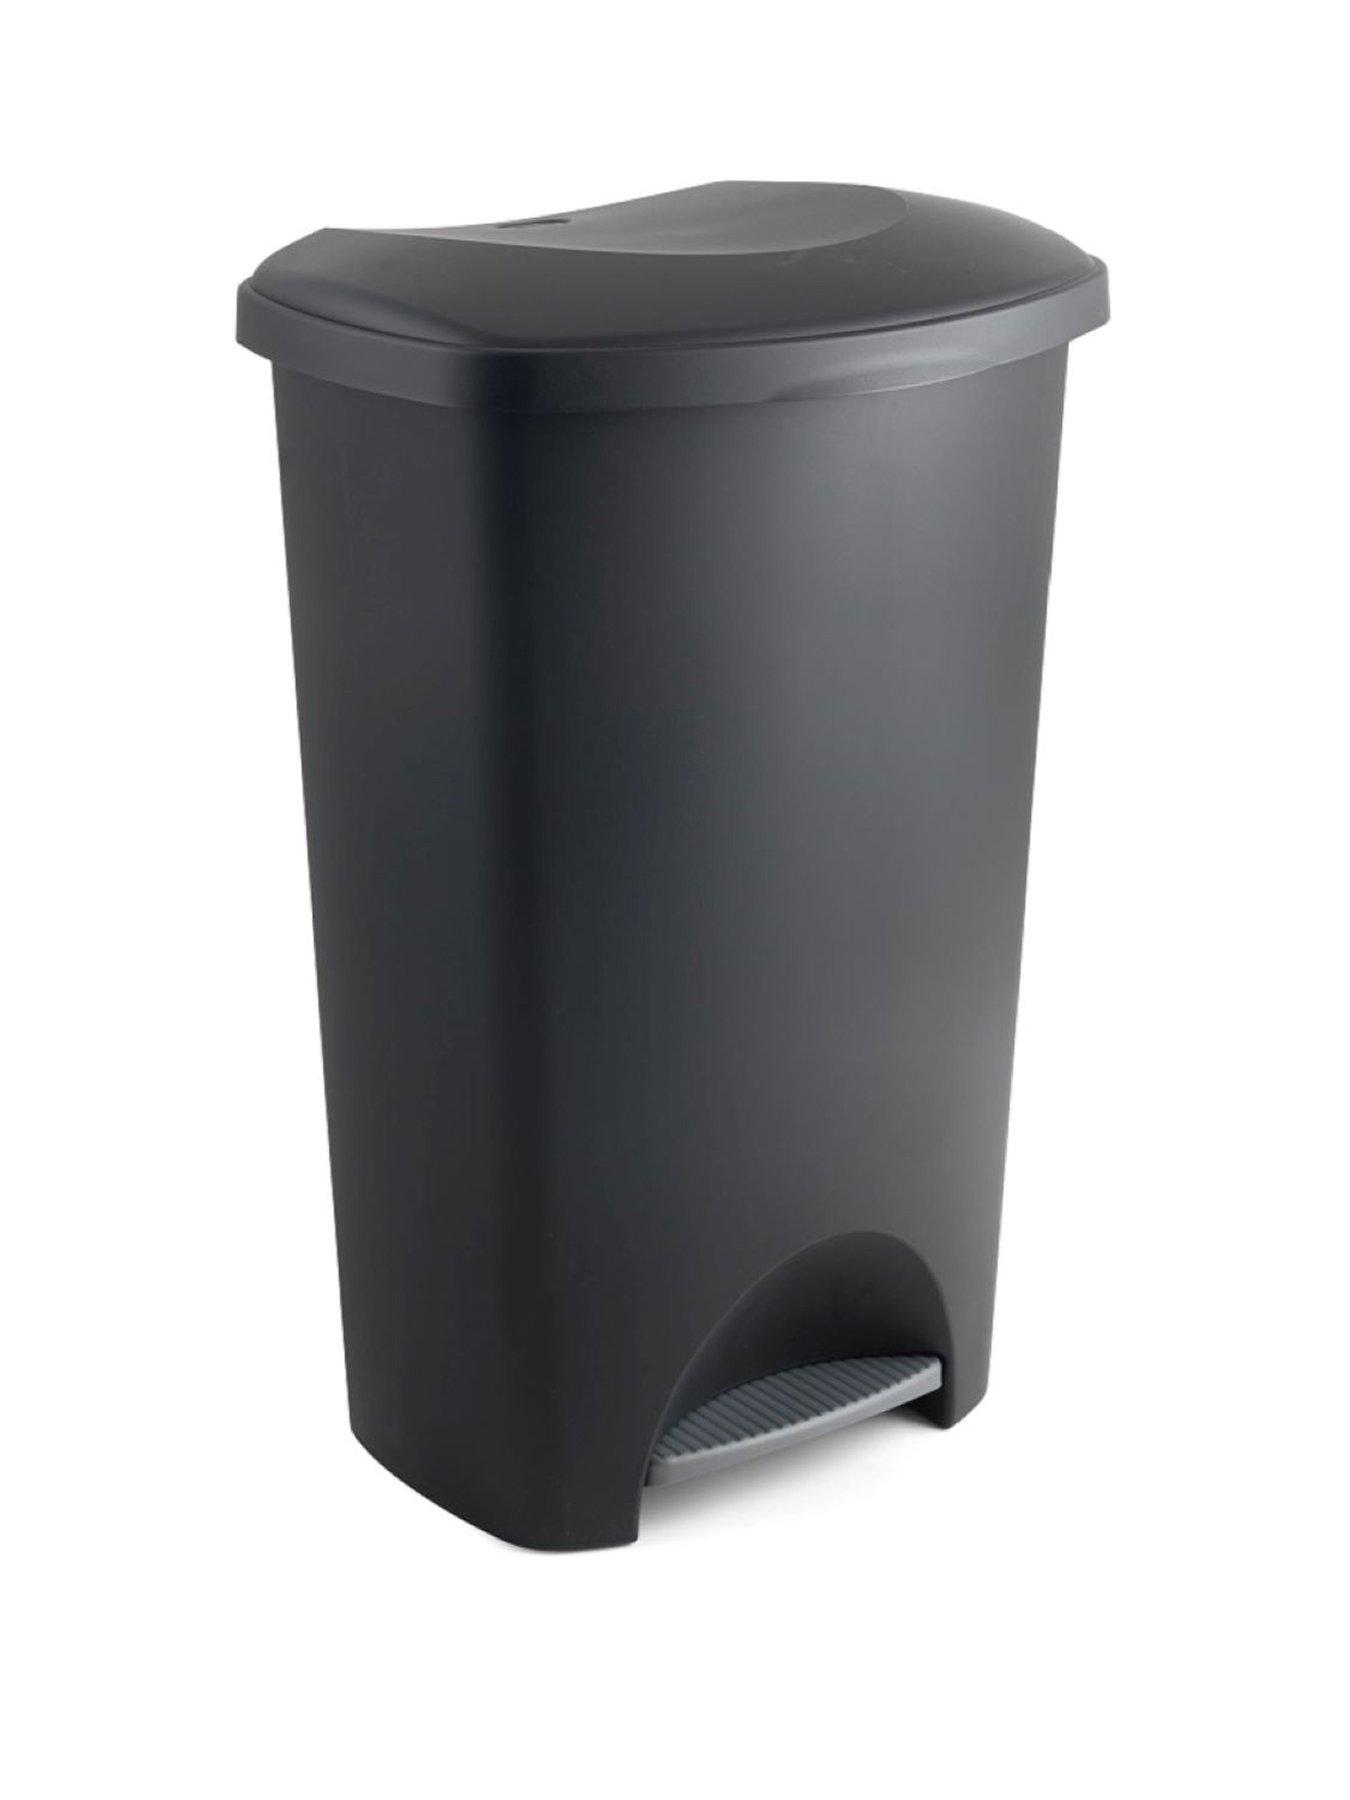 Banquet 100 Tall Kitchen Bin Liners Tie Handle 100% Recycled Plastic 50L Bins 